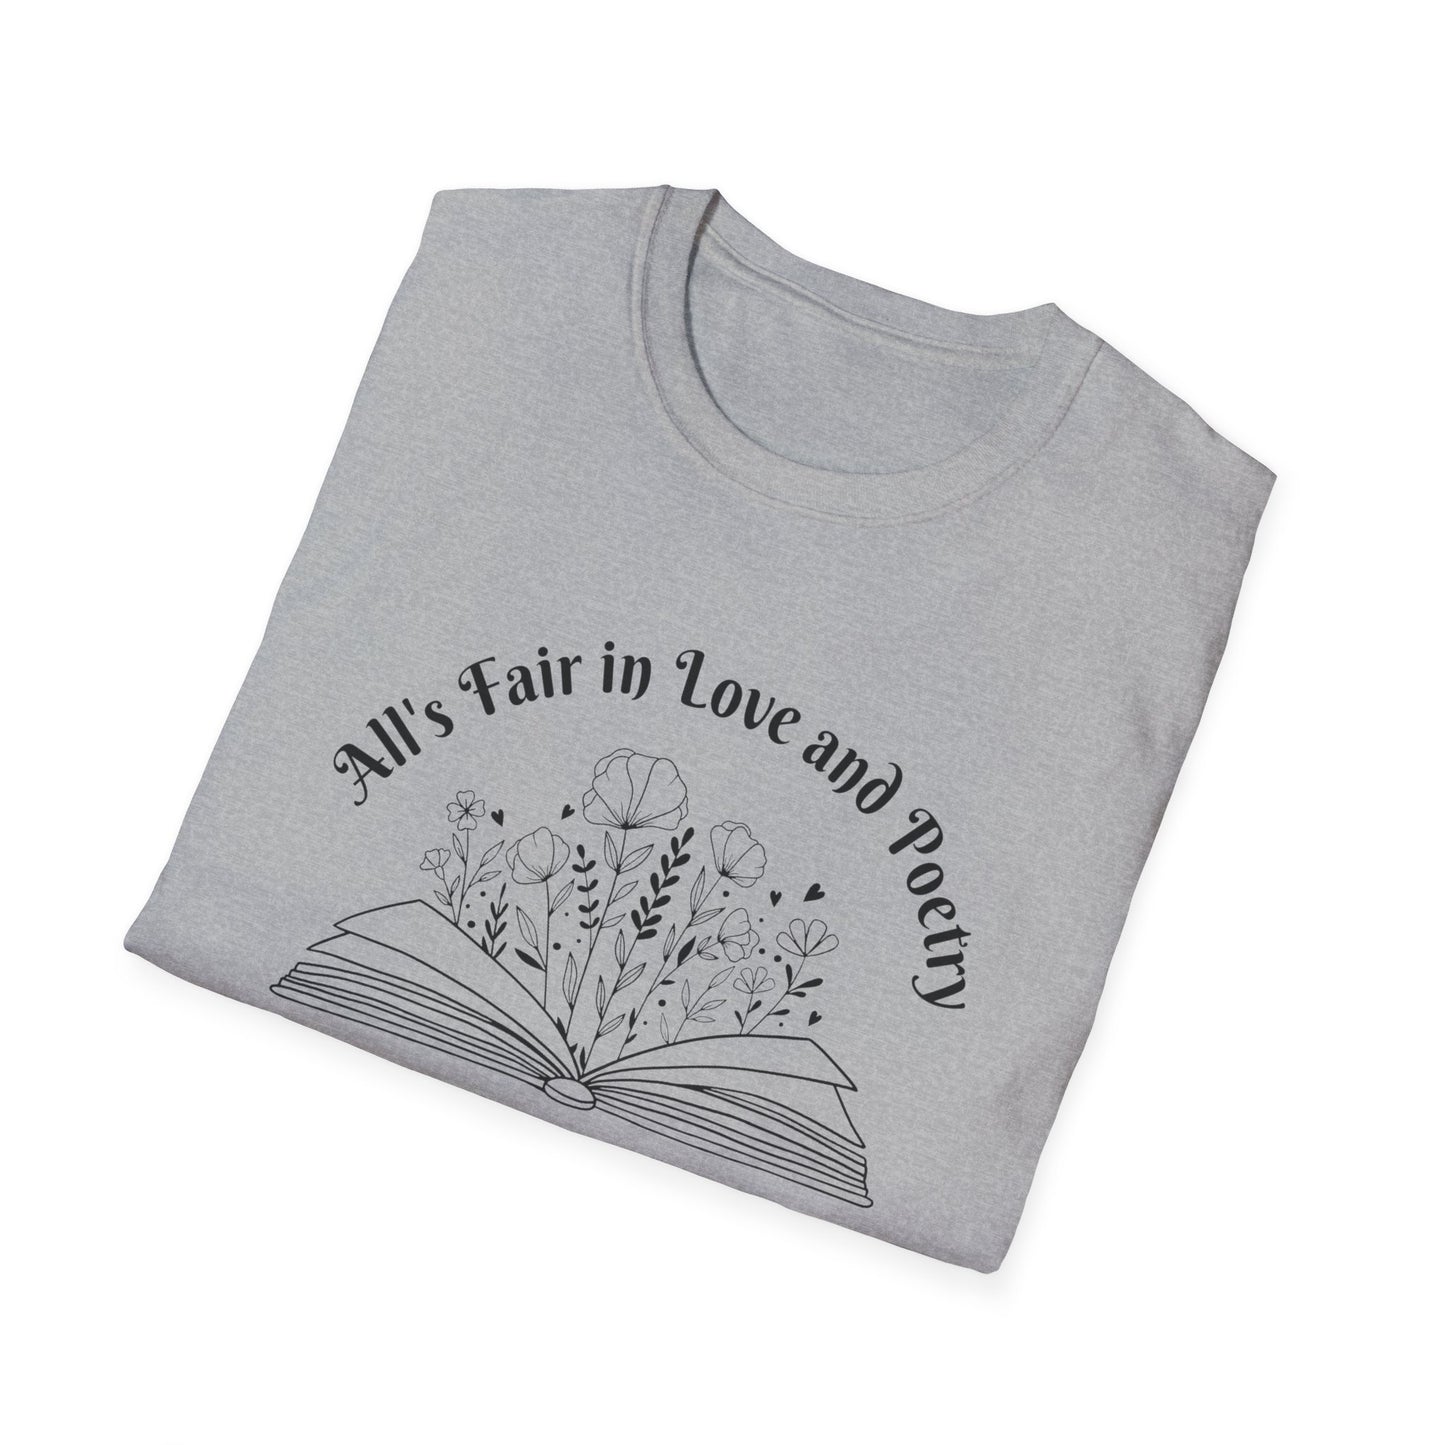 All is Fair in Love and Poetry - Unisex Softstyle T-Shirt